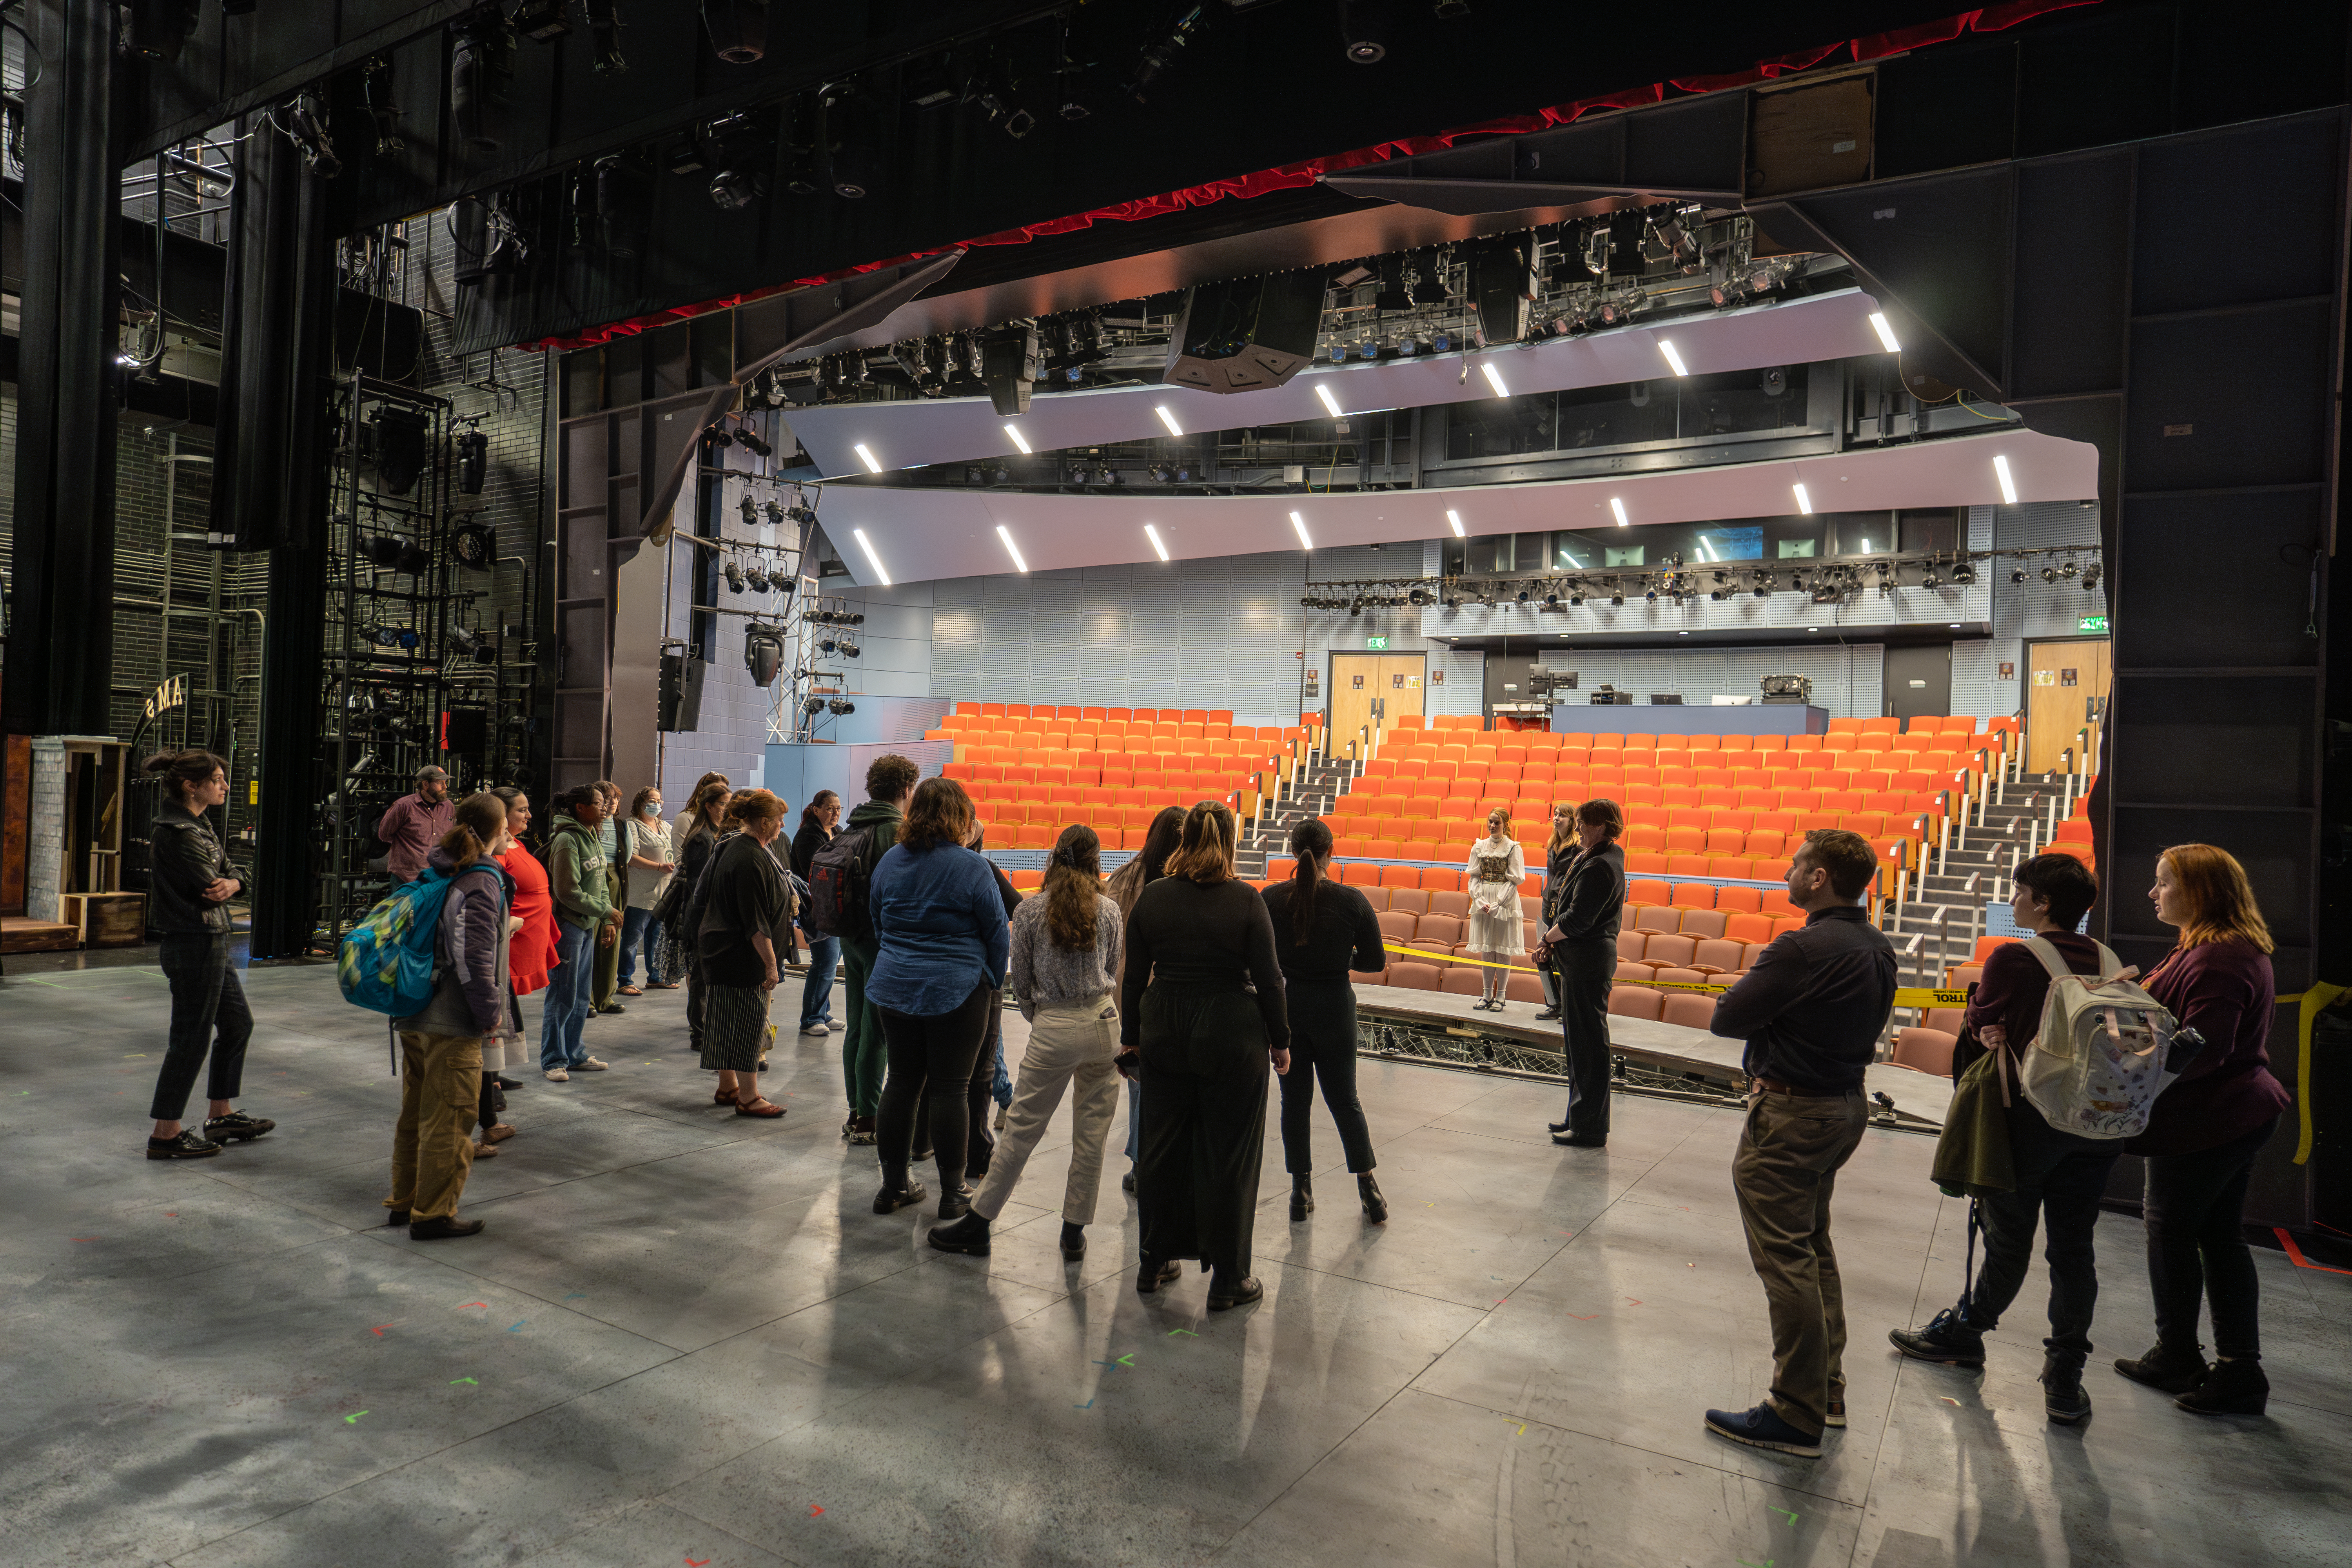 Kat McGreevy, assistant director of the recent production of “The Addams Family”, leads a segment of the backstage tour of the musical comedy production during Quest.